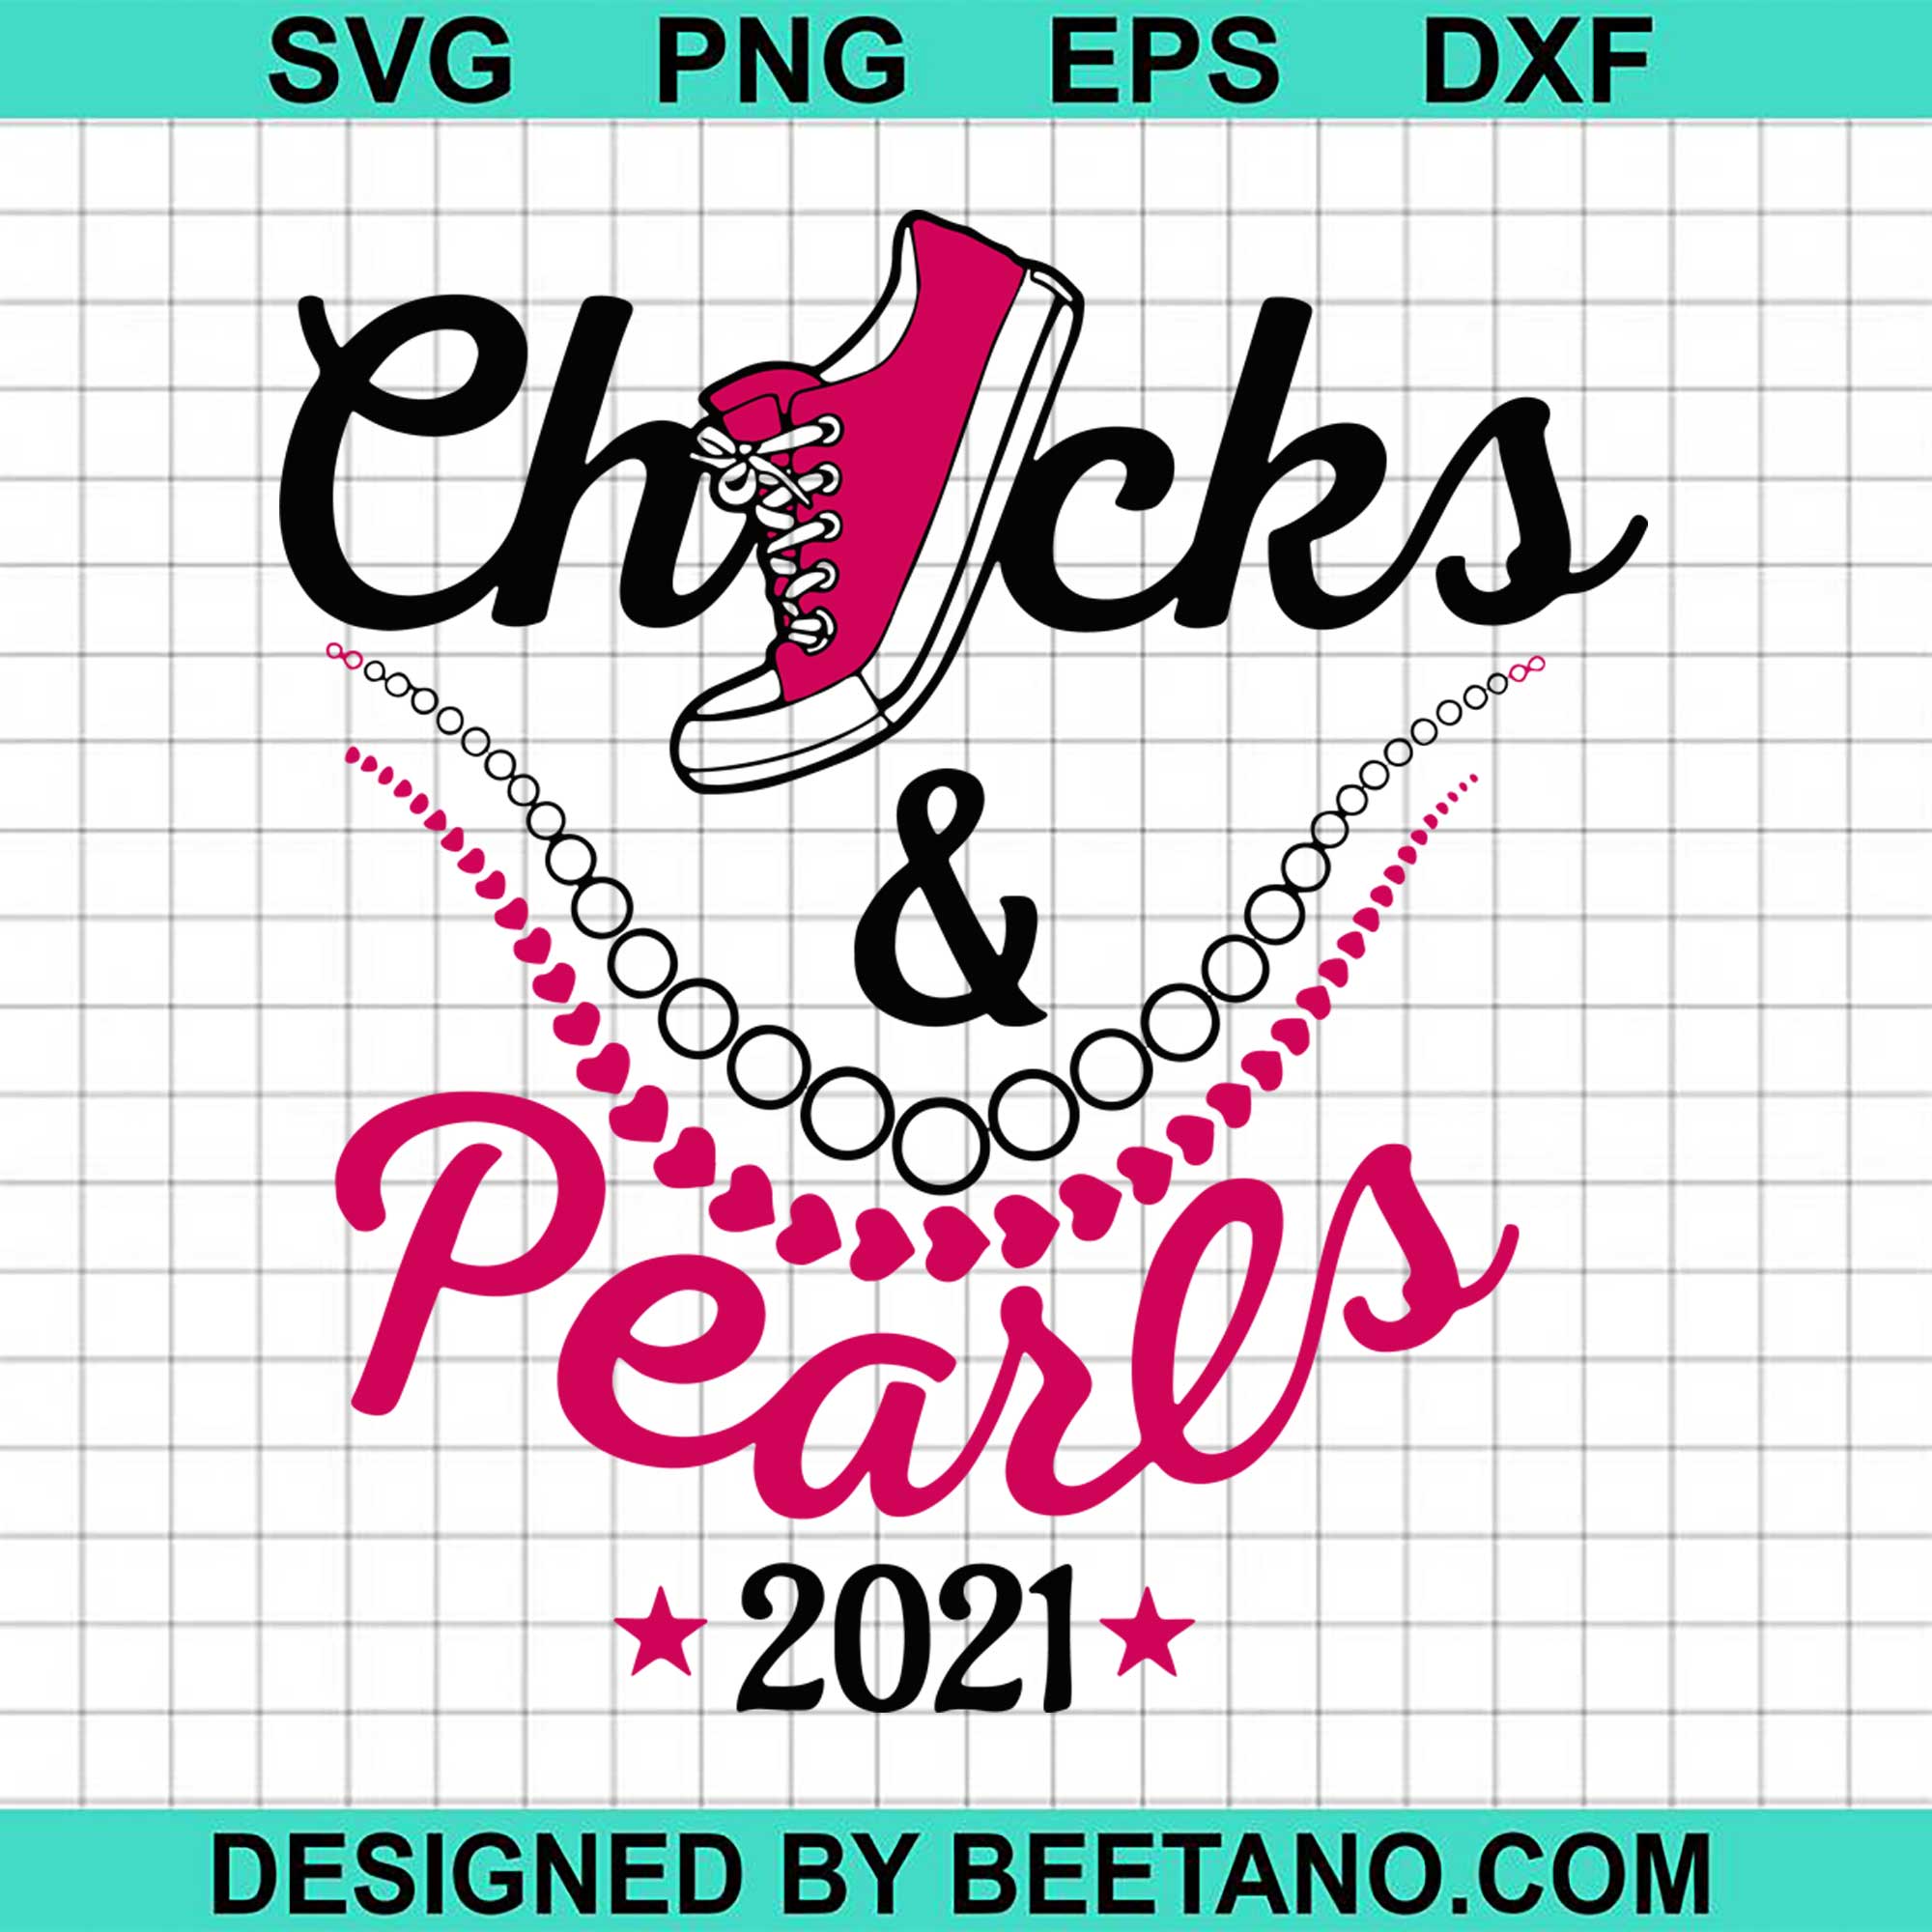 Download Chucks And Pearls 2021 Svg Cut File For Cricut Silhouette Machine Make Beetanosvg Scalable Vector Graphics